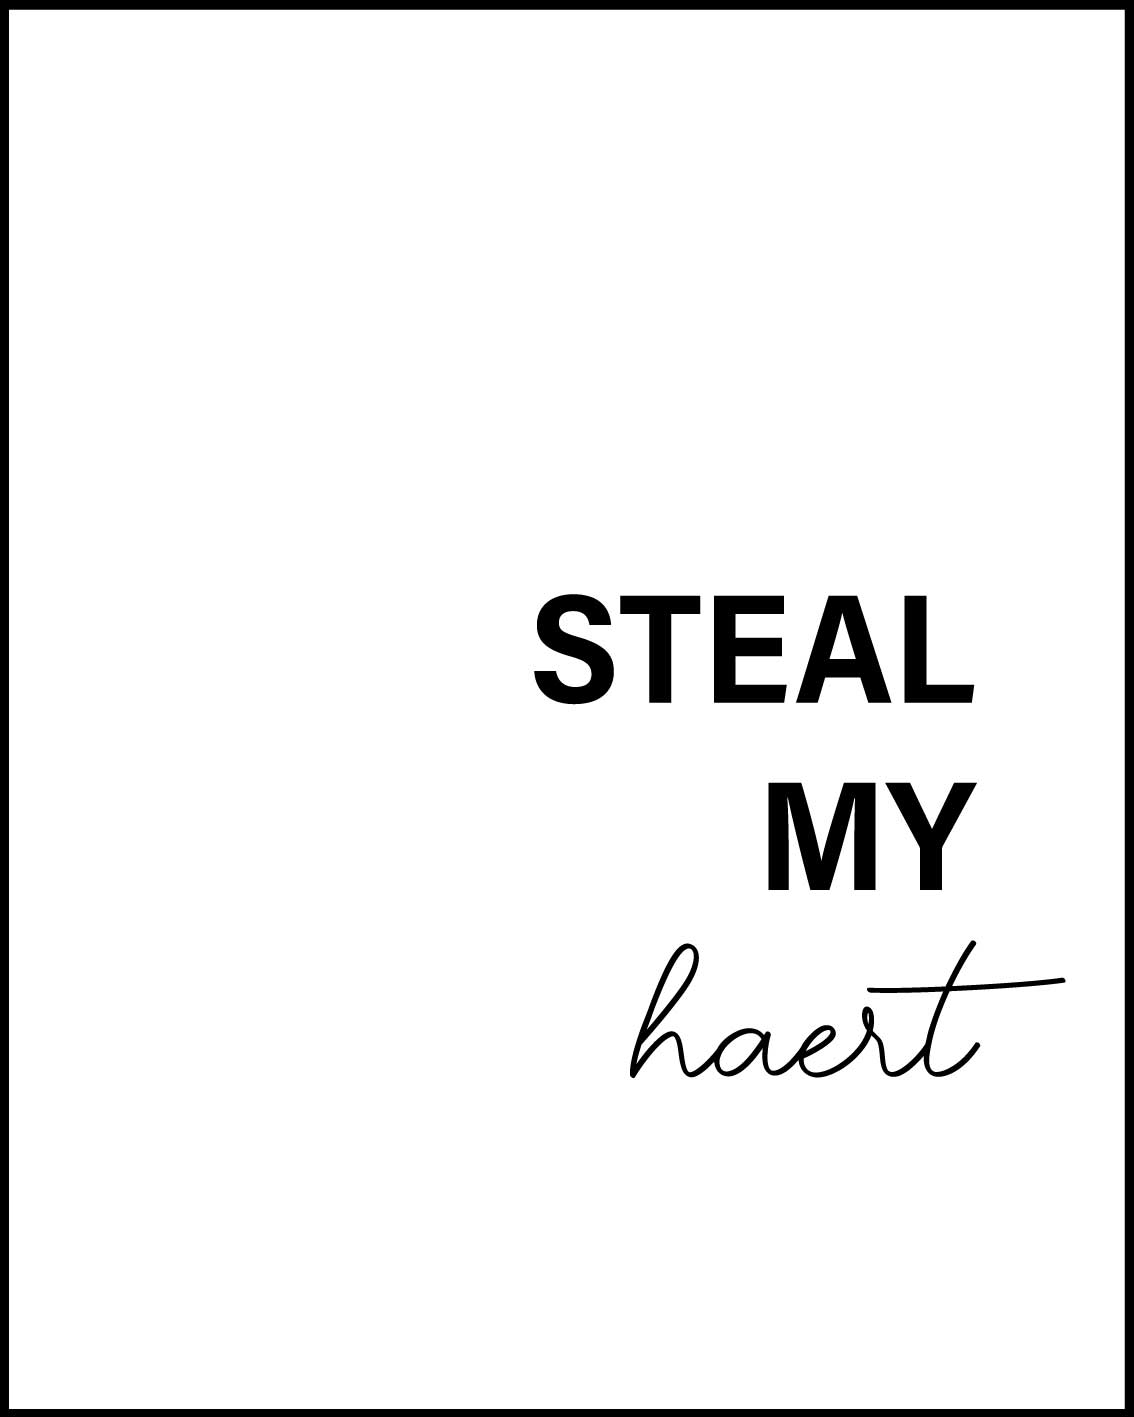 Steal my heart not my blanket Posters